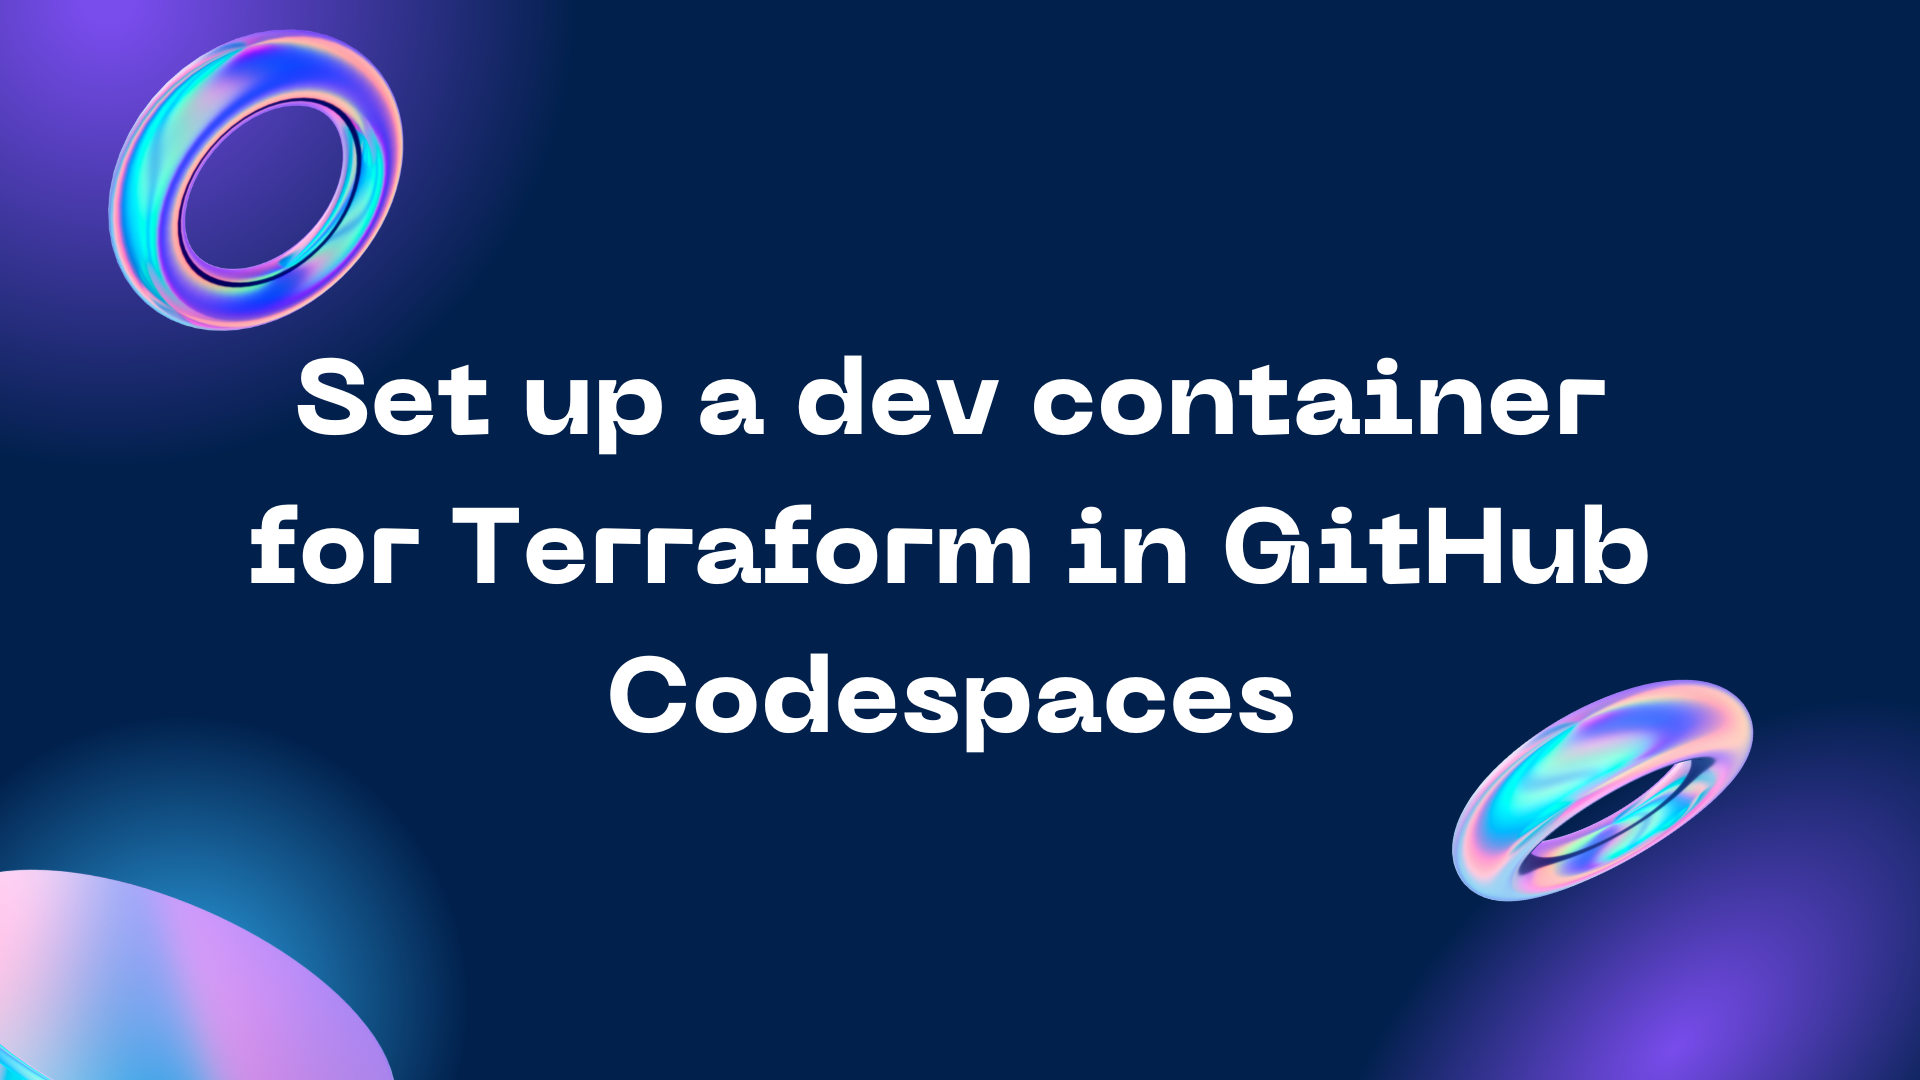 Set up a dev container for Terraform in GitHub Codespaces